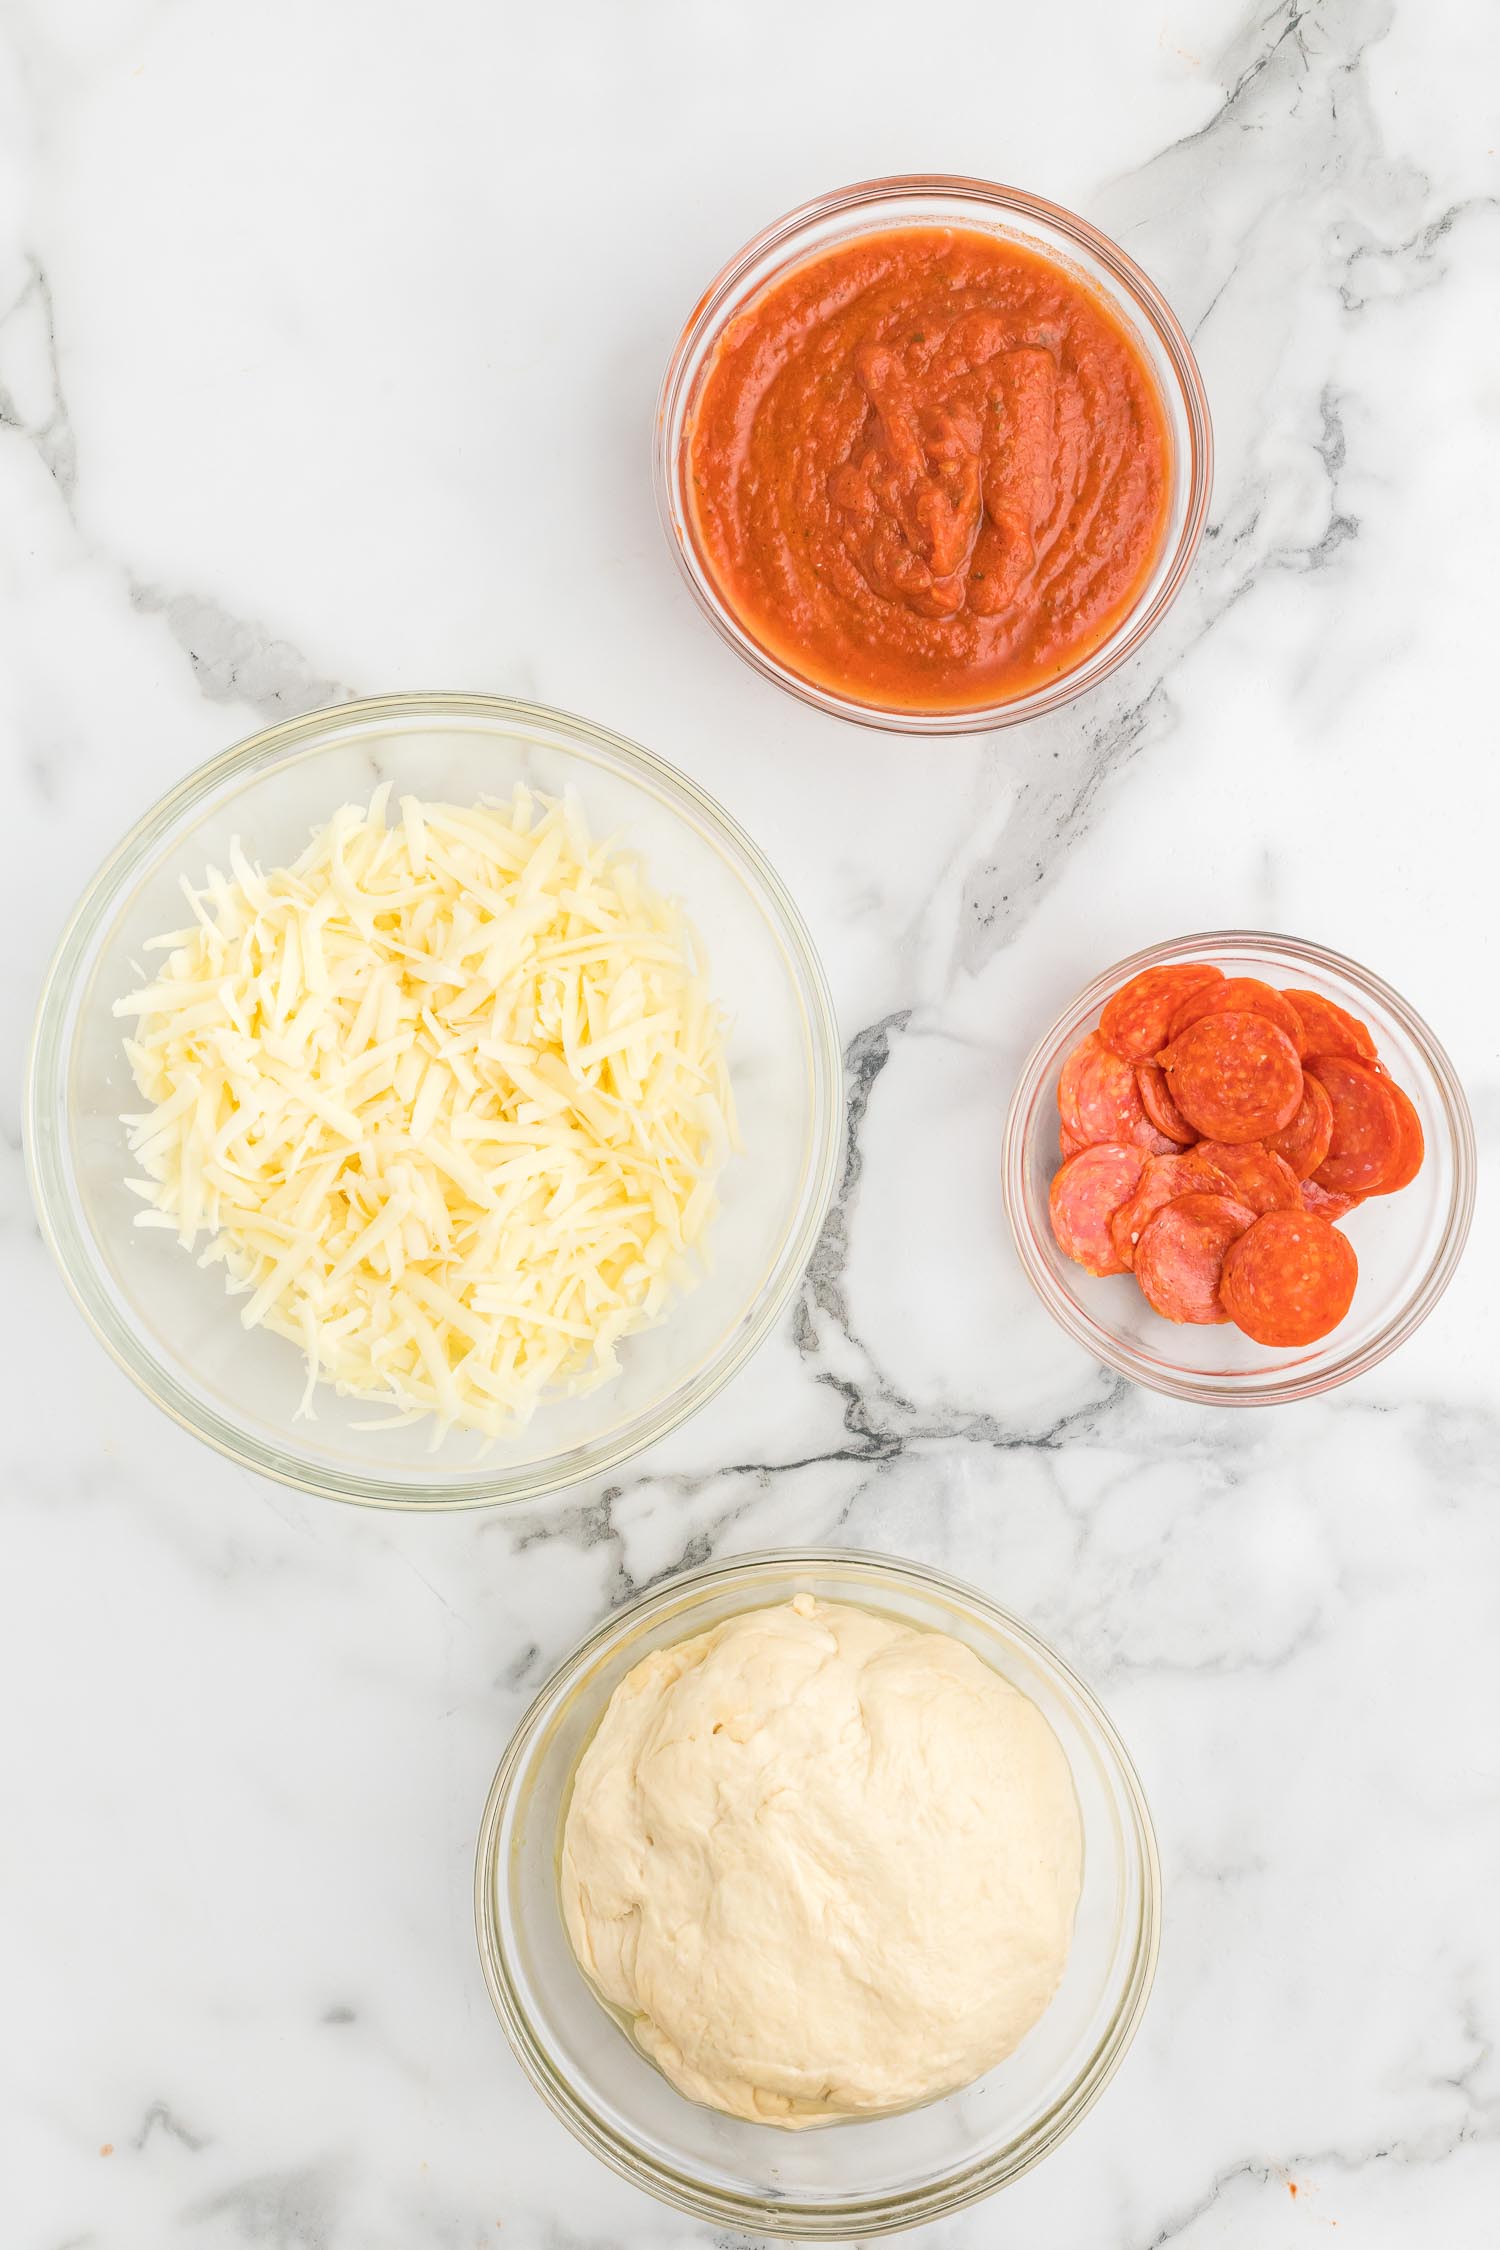 Glass bowls with pizza toppings: pepperoni, shredded cheese, tomato sauce, homemade pizza dough.